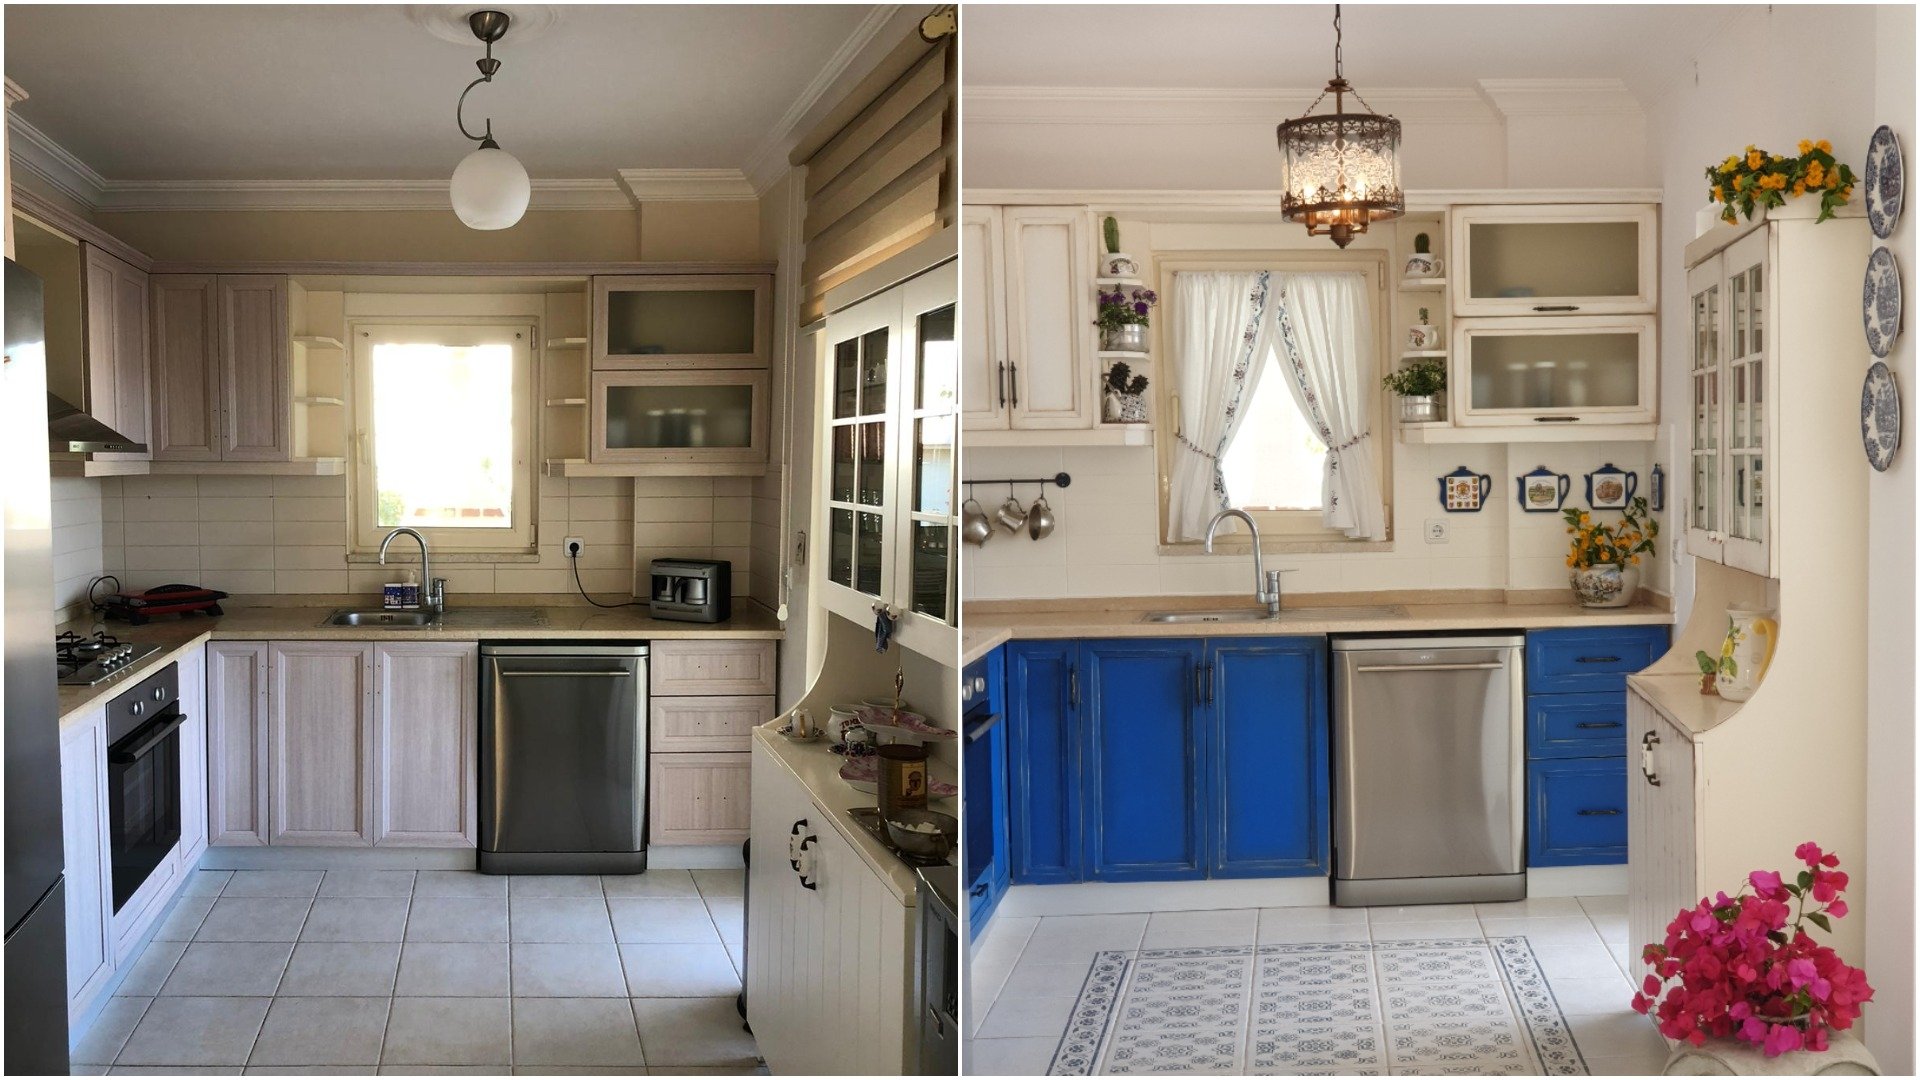 A before and after collage of pictures shows a kitchen cabinet renovation project. (Photos courtesy of Tacihan Yongacı)